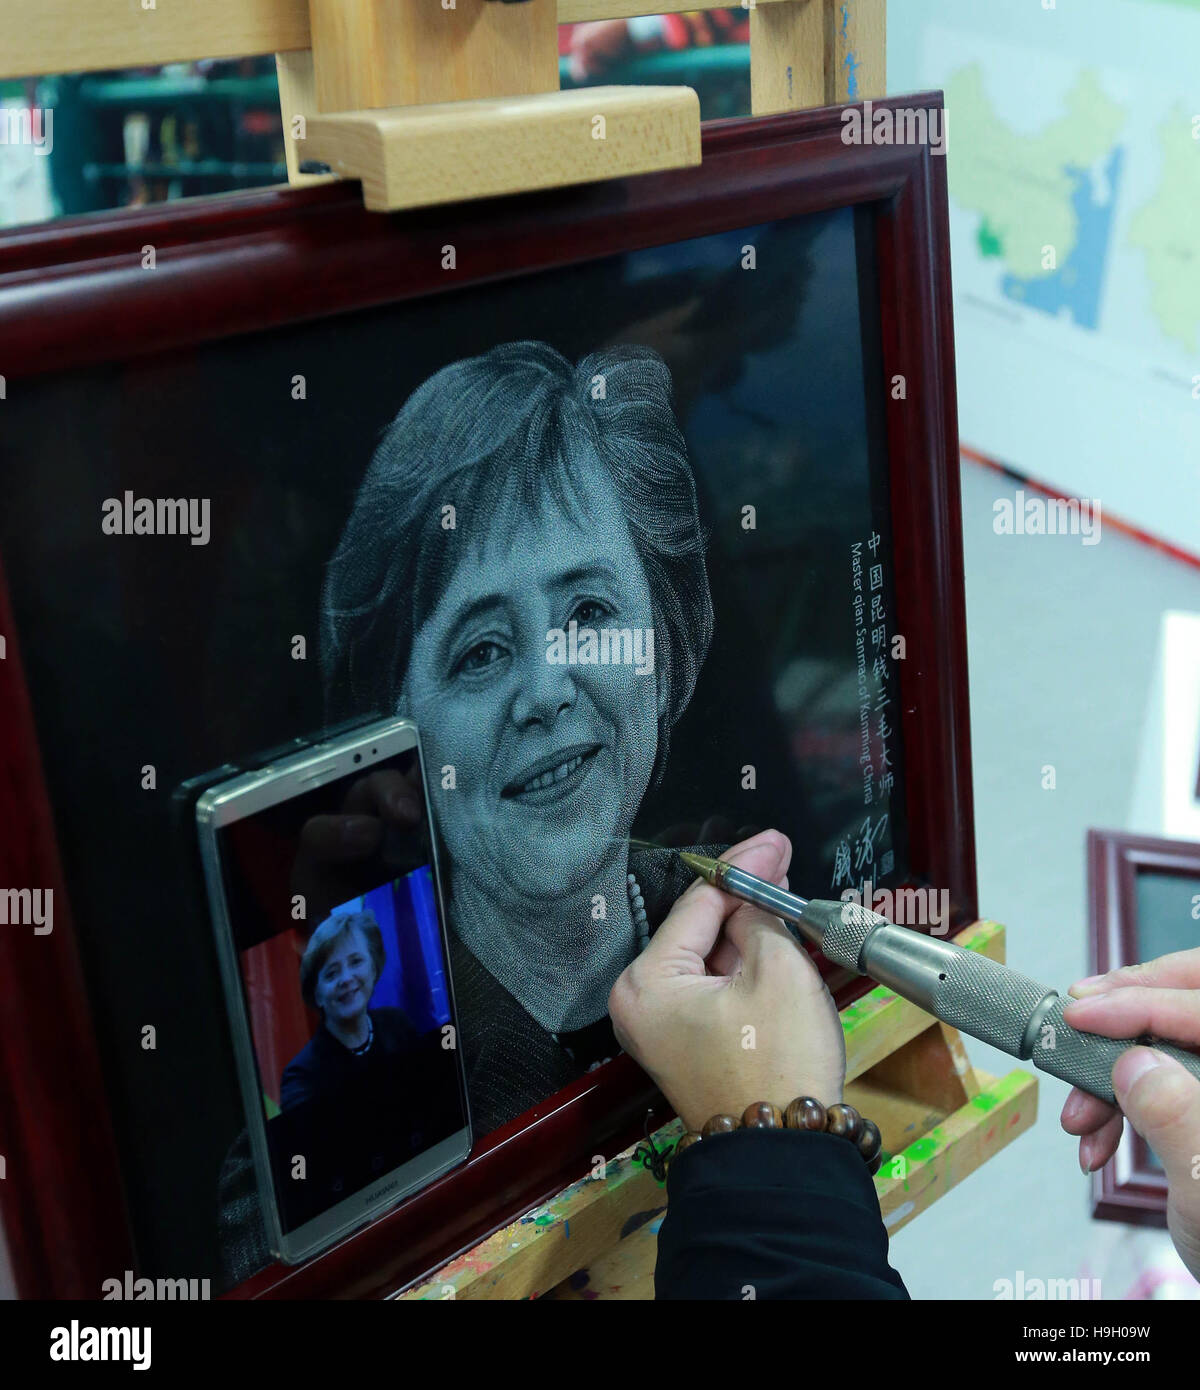 (161123) -- DUSSELDORF, Nov. 23, 2016 (Xinhua) -- Chinese artist Qian Sanmao makes a stone painting of German Chancellor Angela Merkel in Kunming exhibition container in Dusseldorf, Germany, Nov. 21, 2016. Some 15 containers have been unveiled under Dusseldorf's landmark, the over-200-meter-high telecommunications tower Rheinturm, to showcase cultural artifacts from the countries along the 'Belt and Road' routes. Launched Monday night under the title of 'Blue Containers' on New Silk Road, the event will last six days and see paintings, handicrafts, and musical instruments, among others, on dis Stock Photo